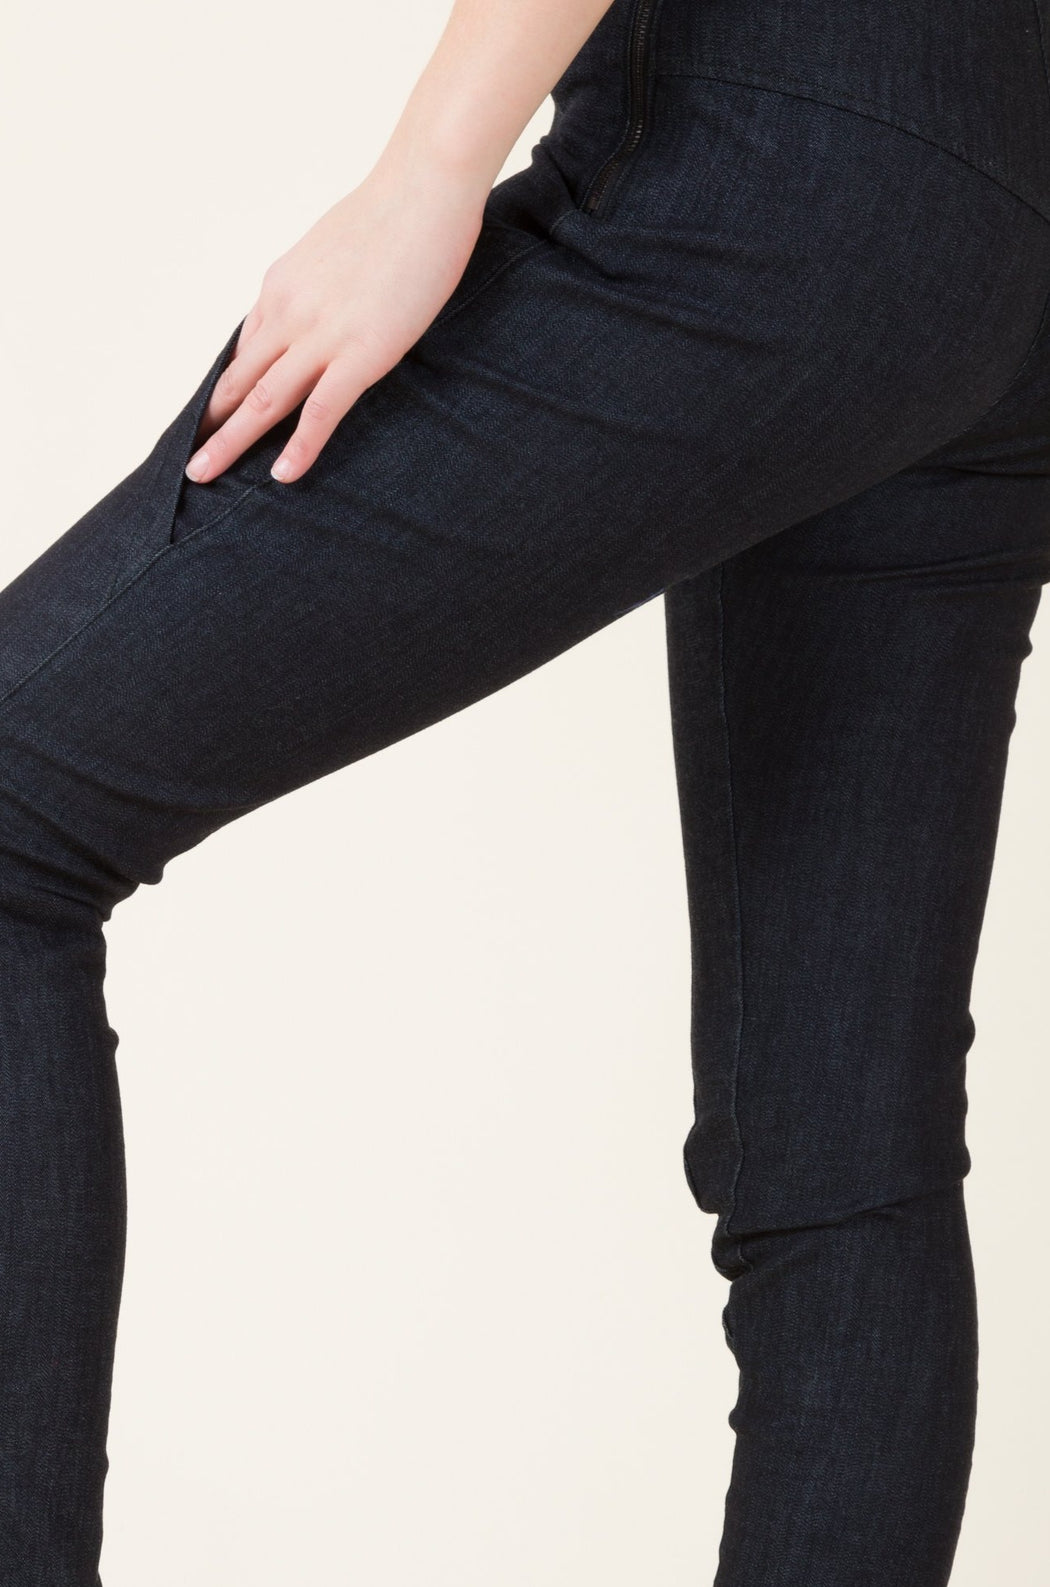 A mid-rise, skinny legged denim legging (or jegging), with elliptical pockets on the thigh and a long inseam.